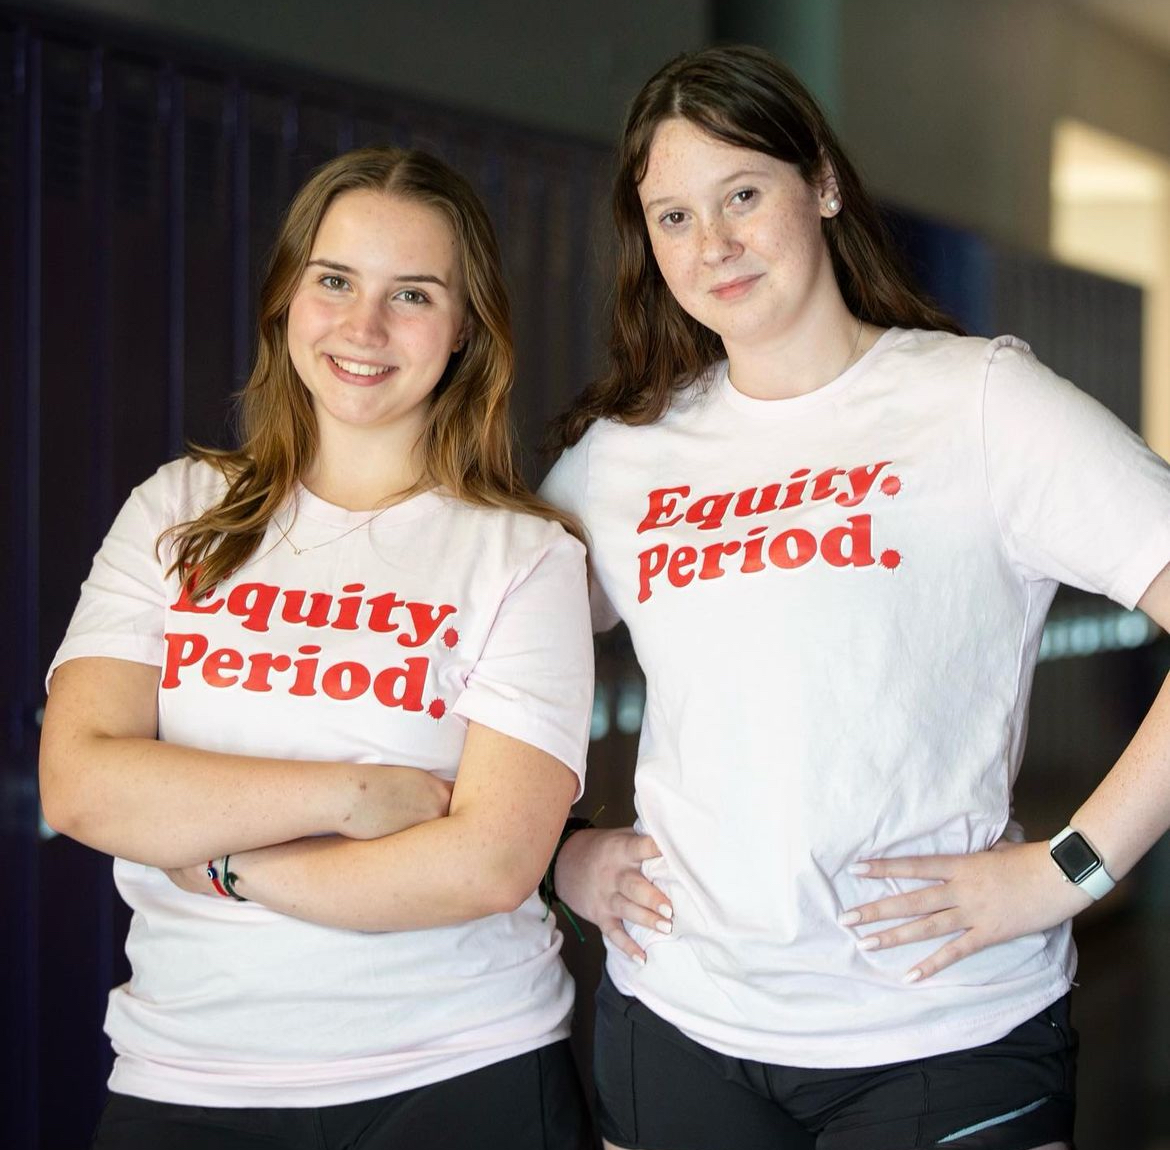 Juniors Becca Houlehan and Izzy Zschoche wearing their custom T Shirts promoting their non-profit organization Equity. Period.